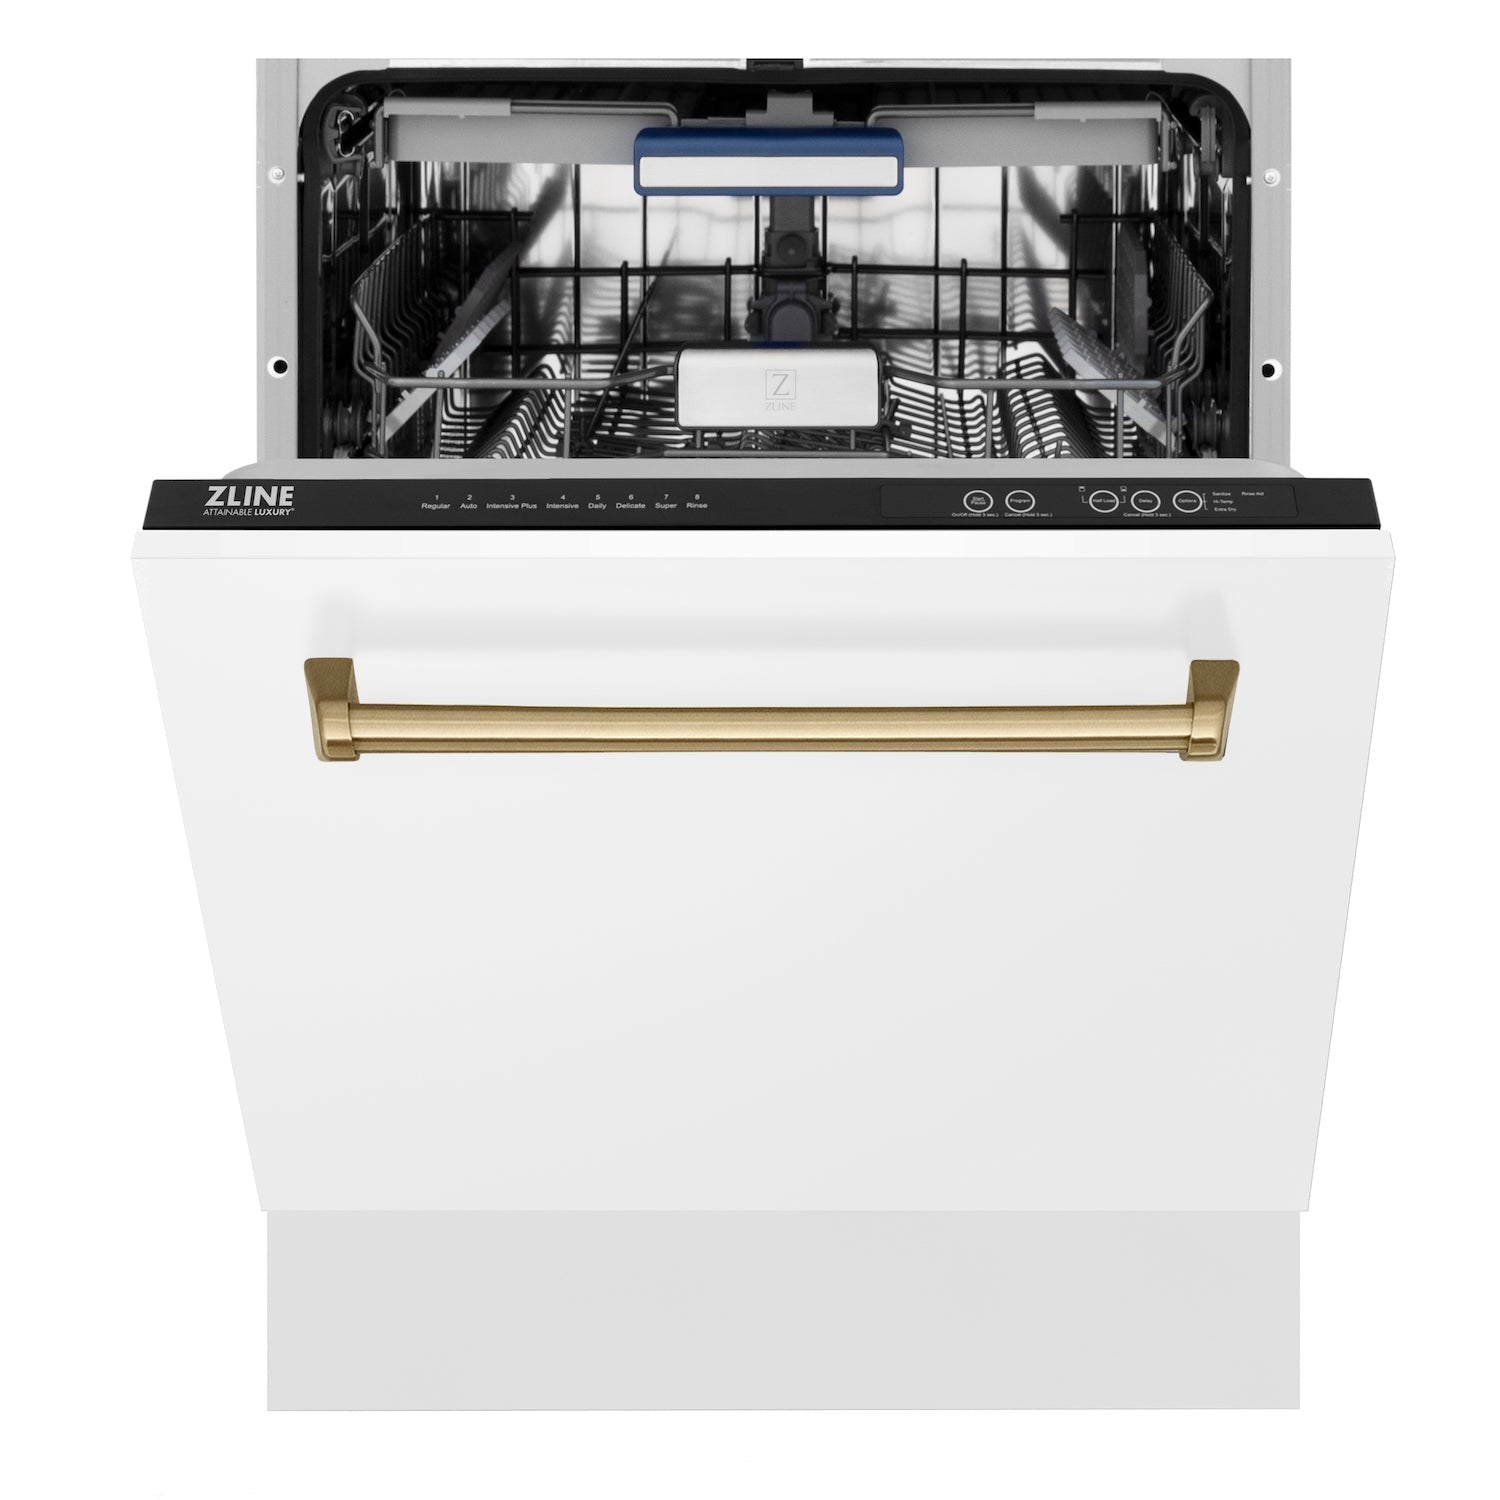 ZLINE Autograph Edition 24" 3rd Rack Top Control Tall Tub Dishwasher in White Matte with Champagne Bronze Handle, 51dBa (DWVZ-WM-24-CB)